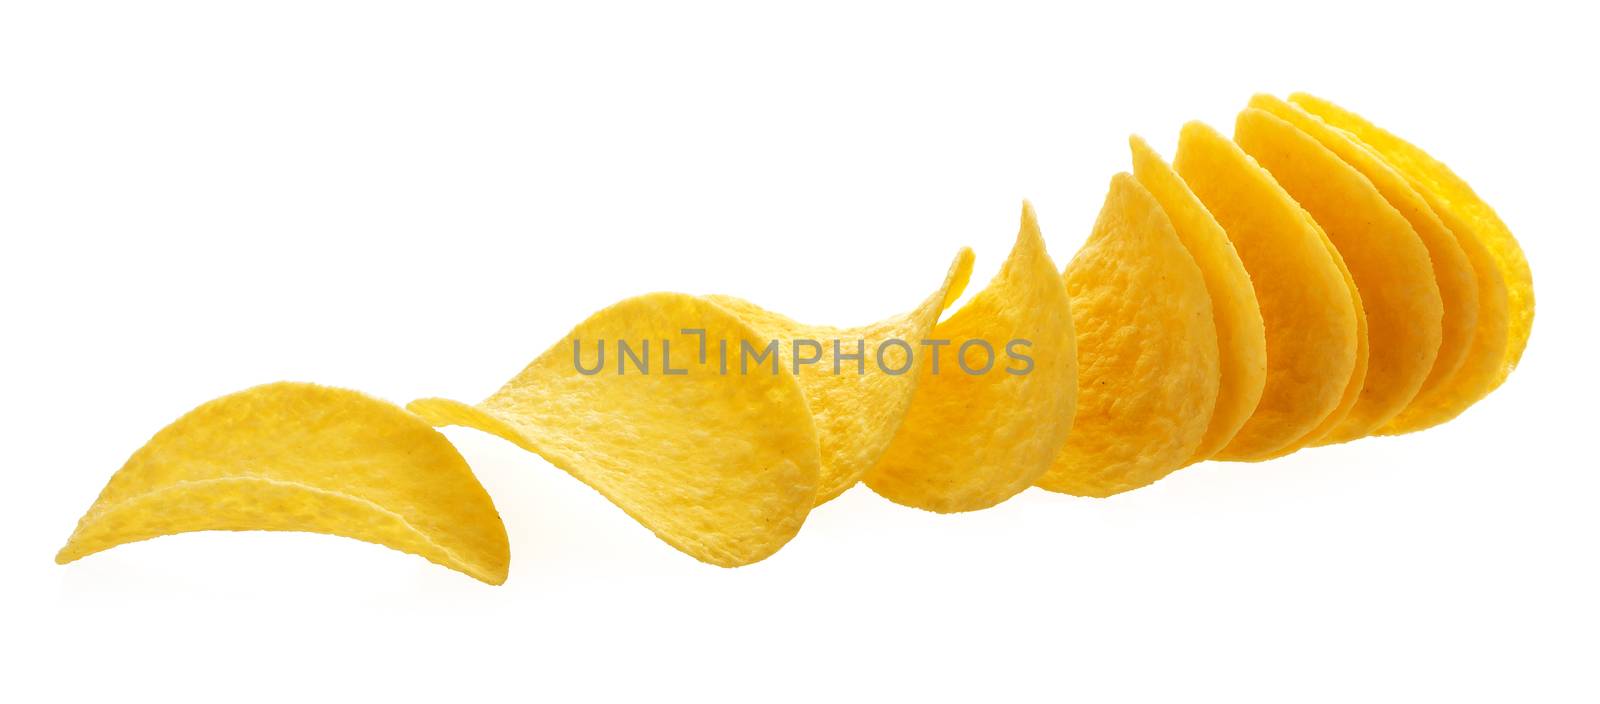 Stack of Potato chips isolated on white background with clipping path